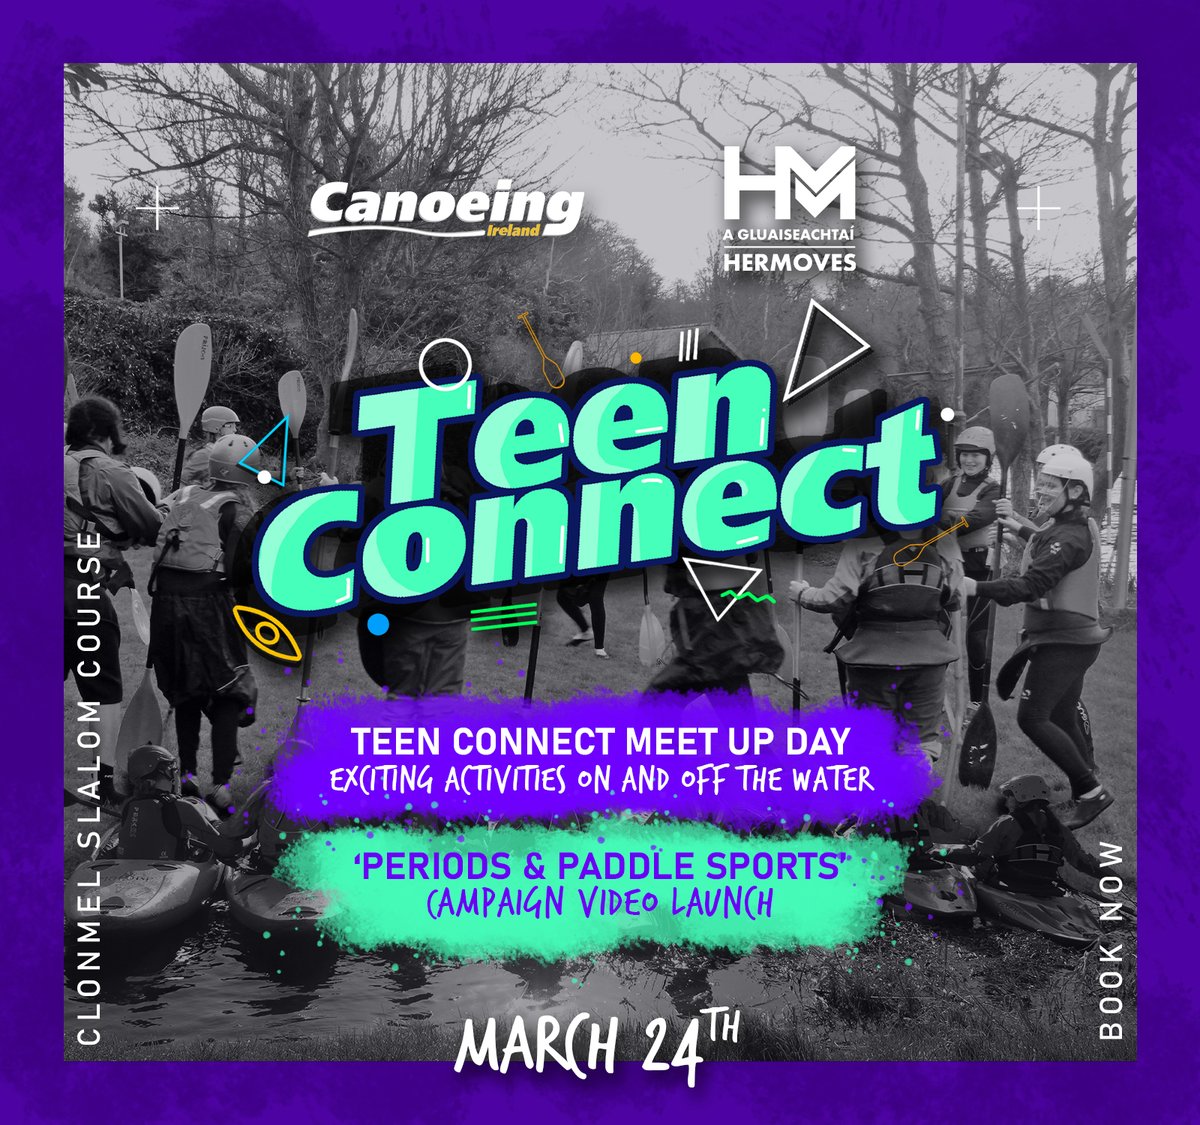 Teen Connect have been busy! 👀 Canoeing Ireland are hosting the Teen Connect Meet Day on Sunday 24th March in Clonmel to launch of their ‘Periods and Paddle Sports’ campaign video. 🎥 Tickets are available on Eventbrite. #FindSomethingThatMoveYou #HerMoves #TeenConnect